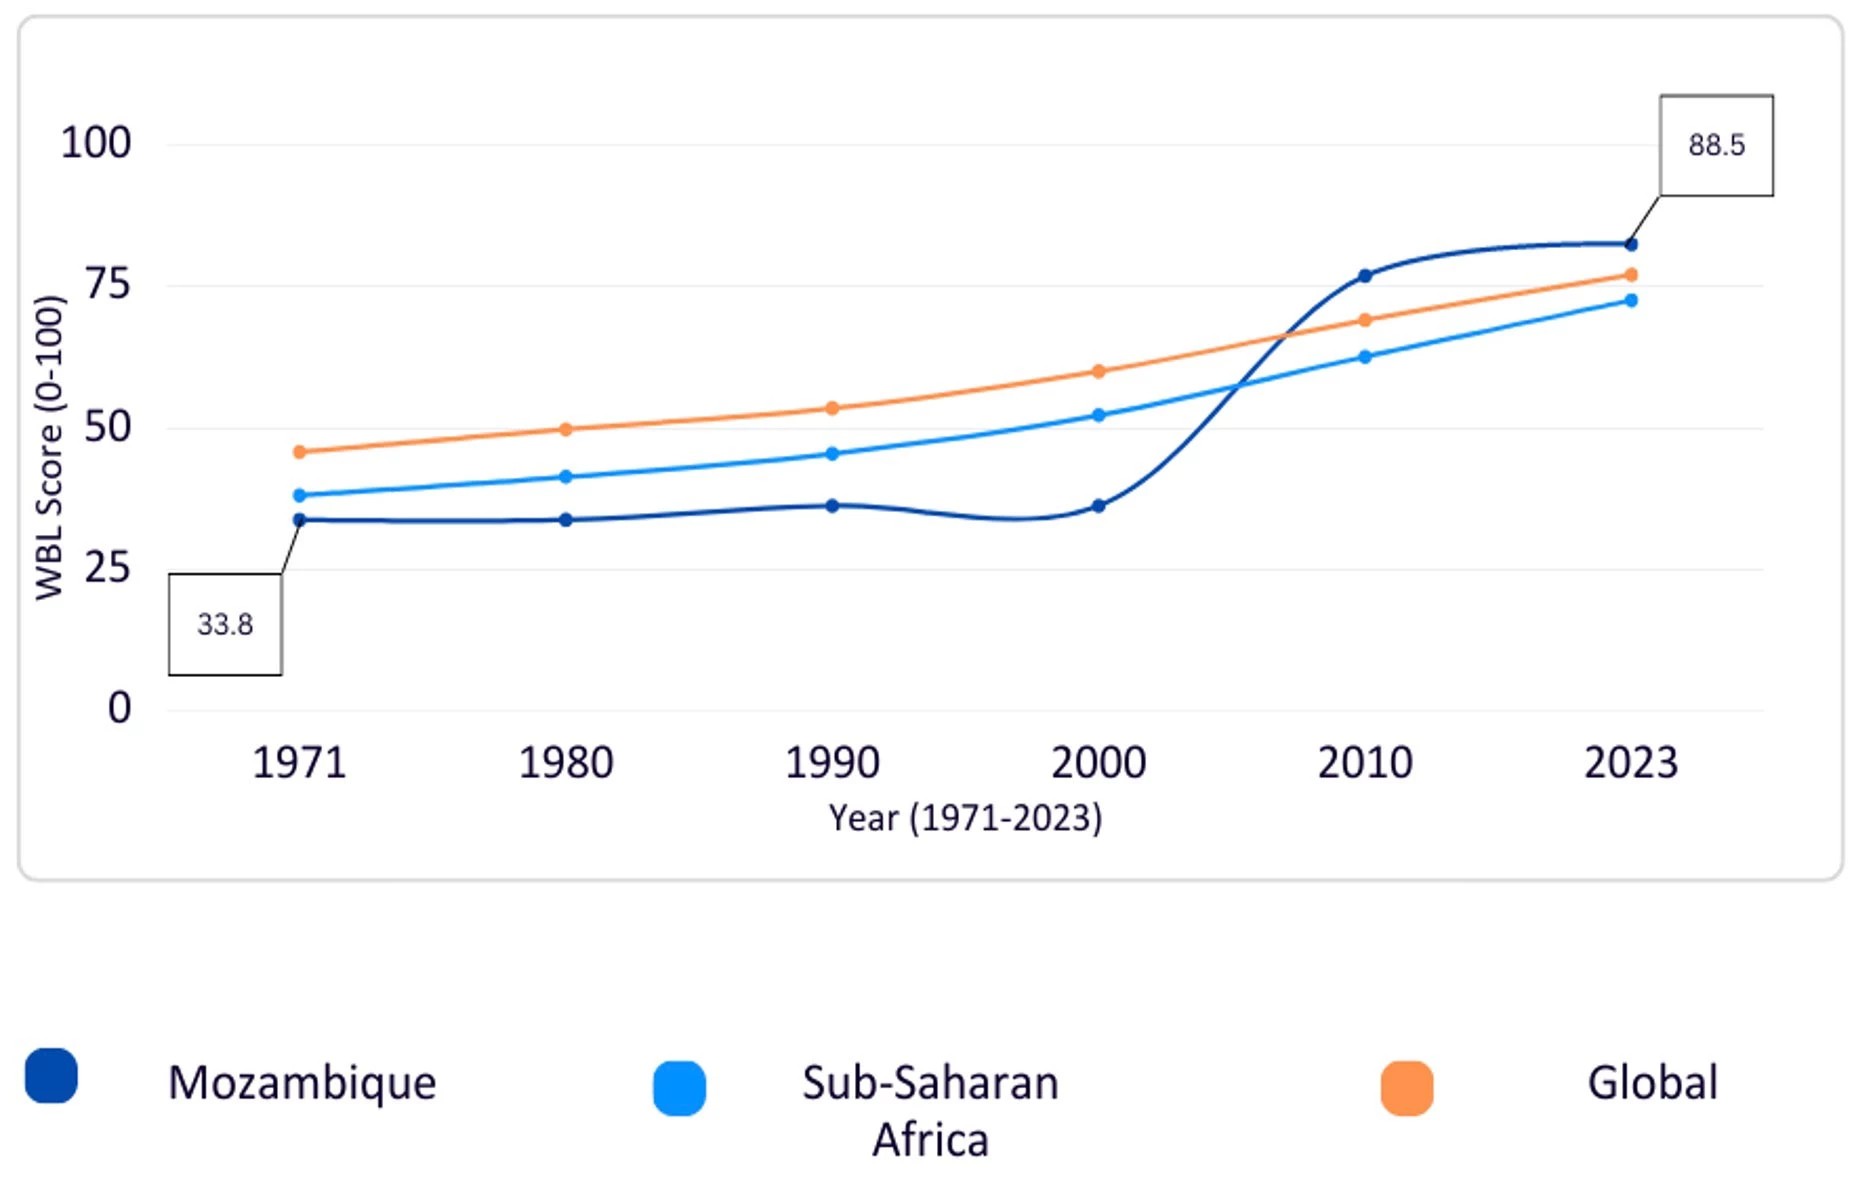 Figure 1. Mozambique’s Women, Business and the Law score over time in comparison to Sub-Saharan African region and global scores 